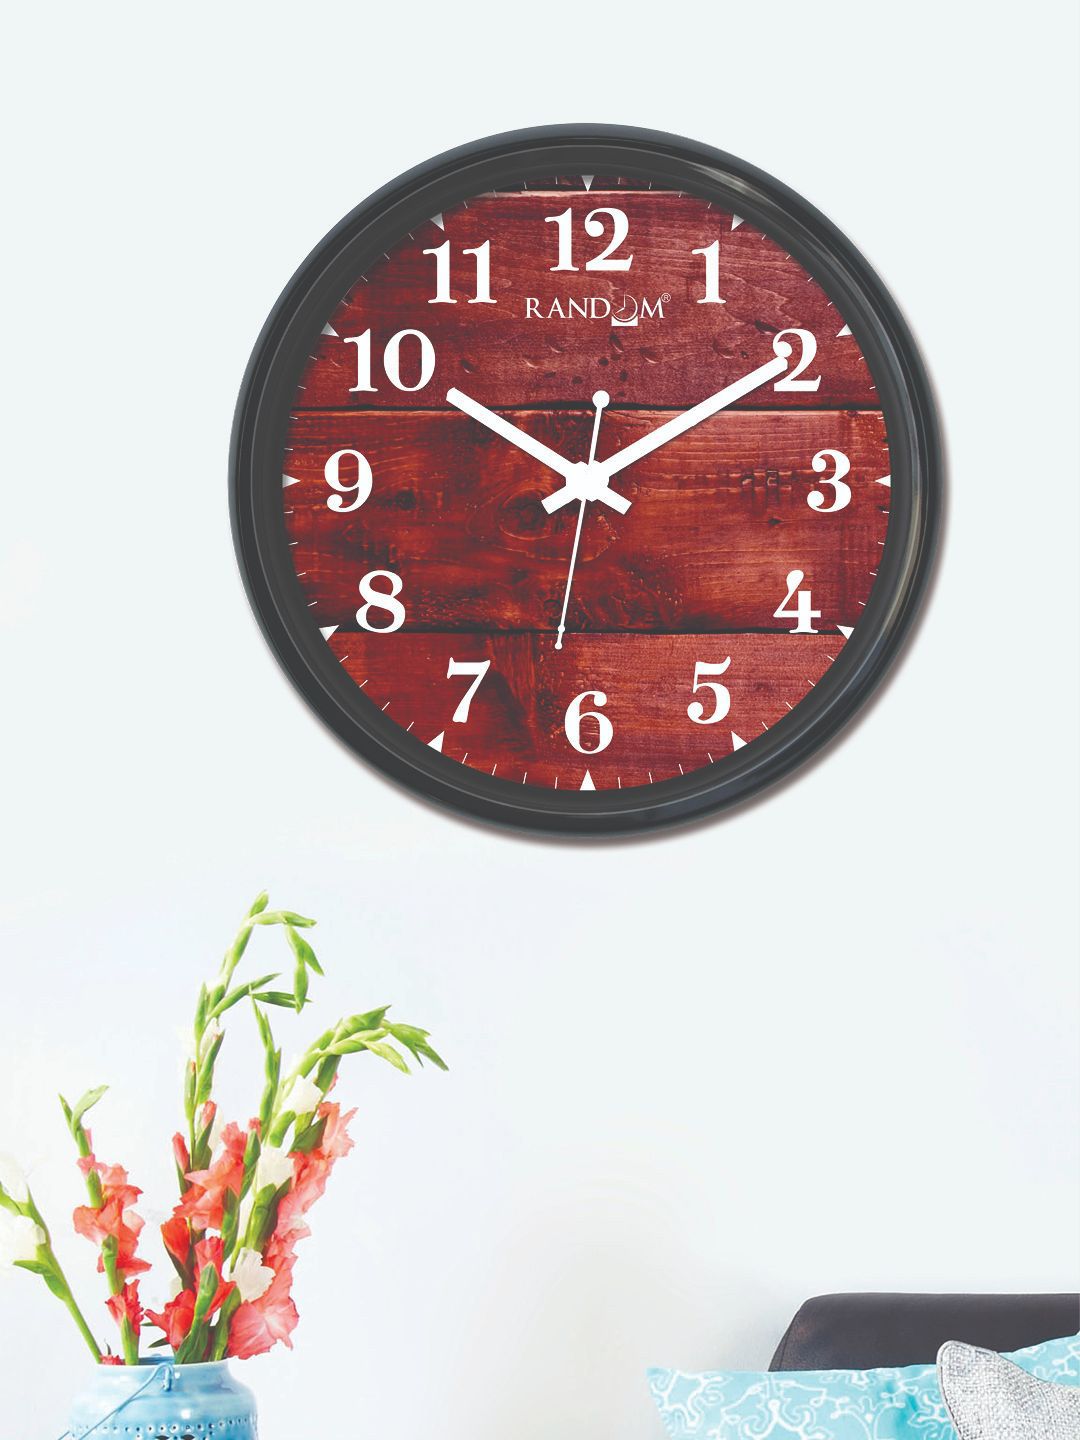 RANDOM Off-White & Maroon Round Printed Analogue Wall Clock (30 cm x 30 cm) Price in India